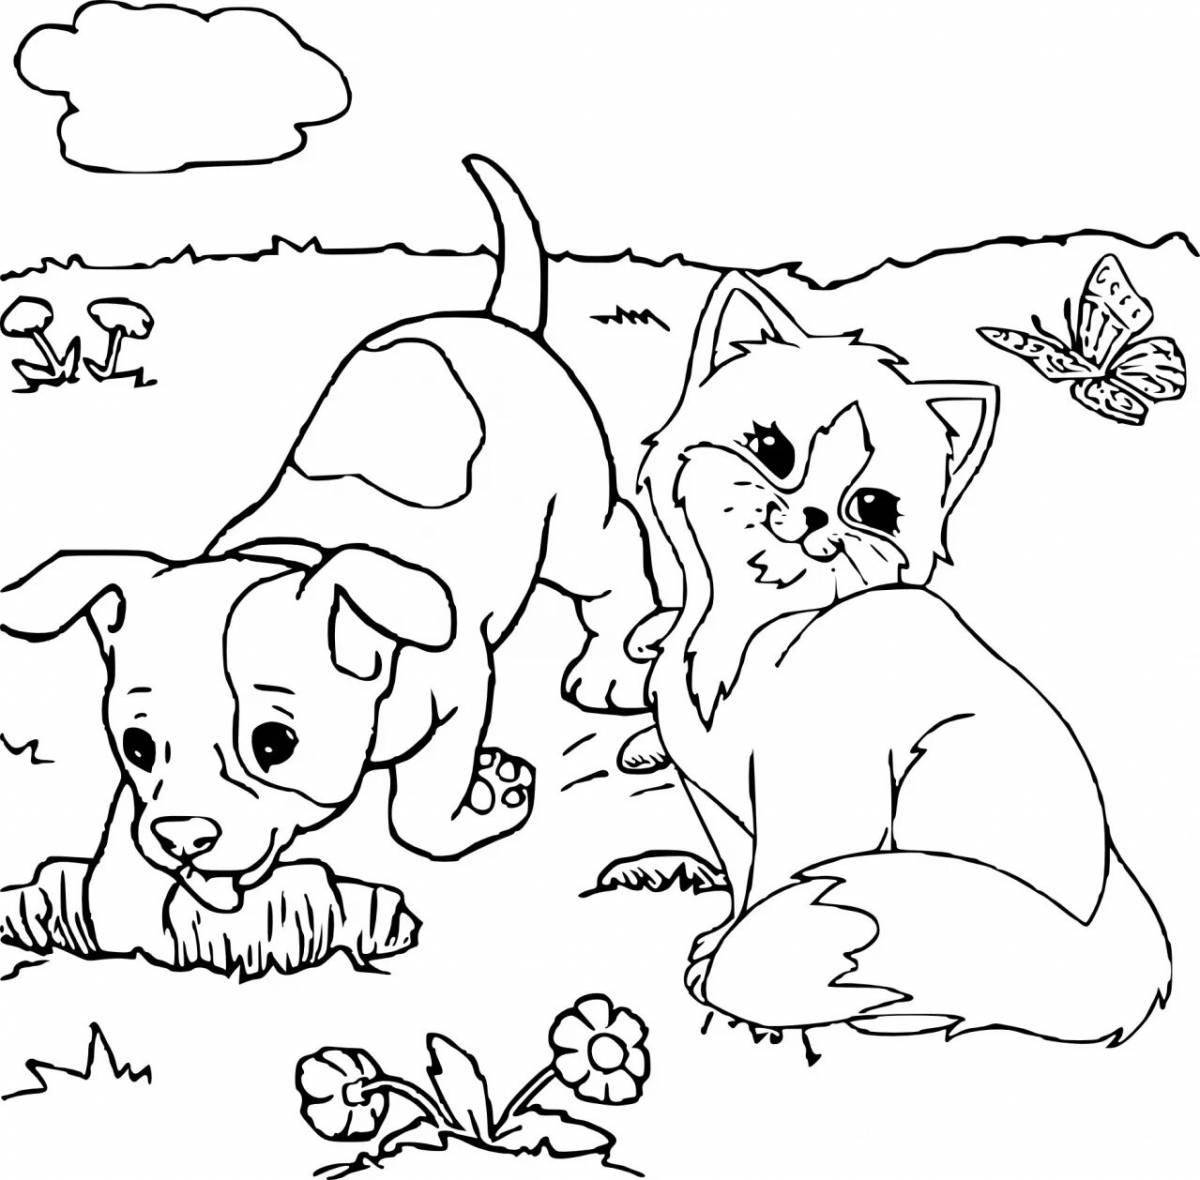 Gorgeous kitten and dog coloring book